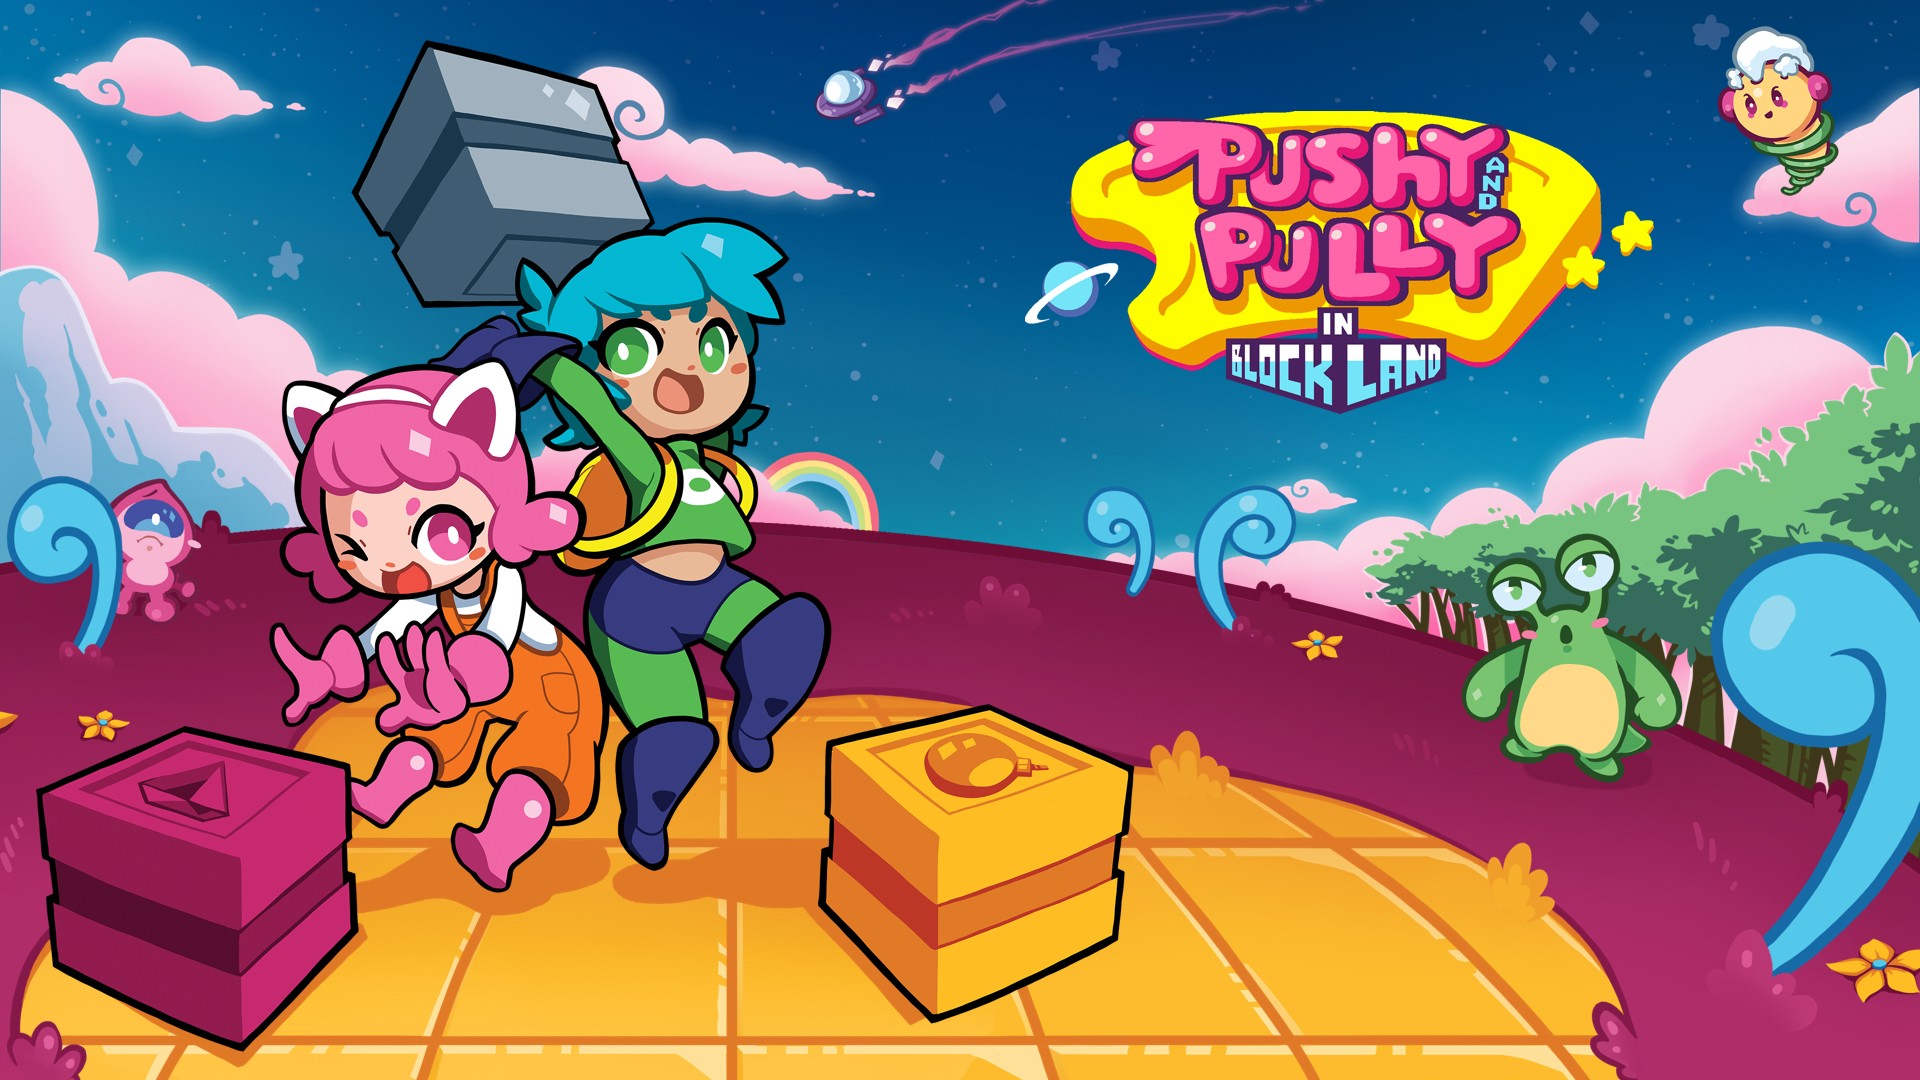 Video For Retro Block Adventure Pushy and Pully in Blockland Available Now on Xbox One